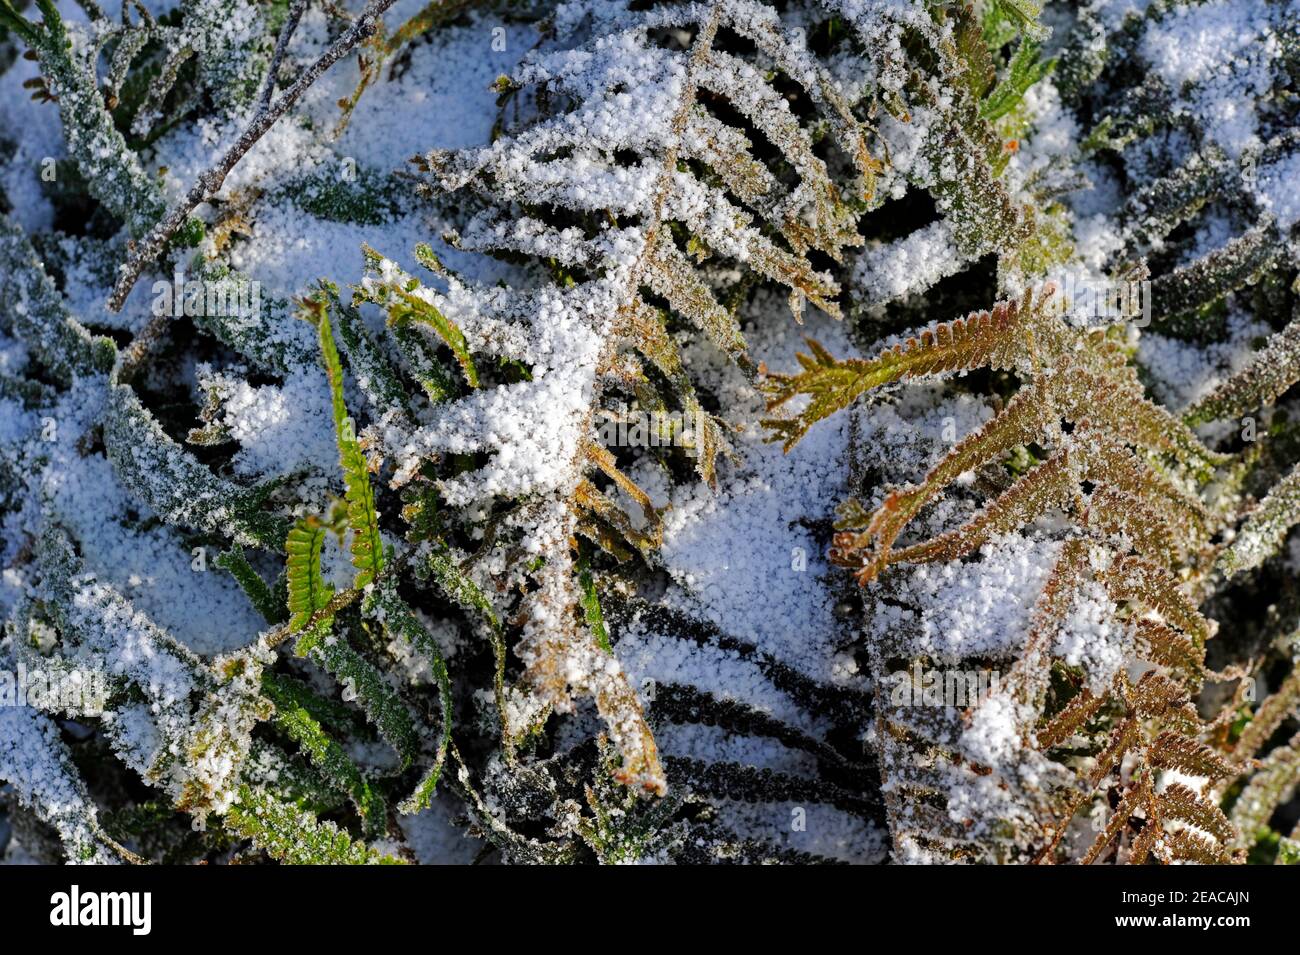 Ferns dusted with snow in the snowy winter forest Stock Photo